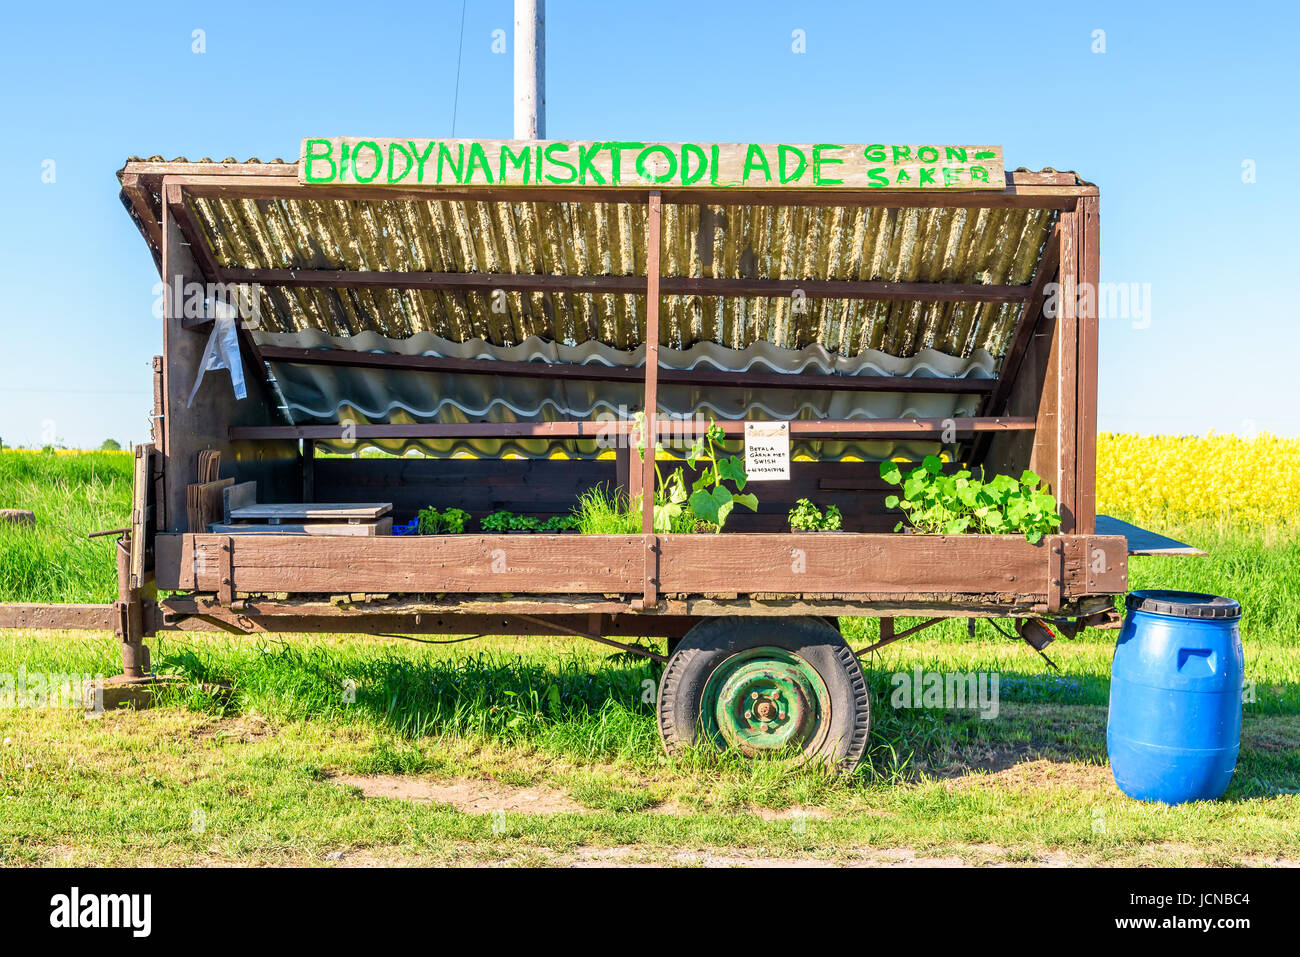 Oland, Sweden - May 28, 2017: Environmental documentary. Unmanned or unattended vegetable kiosk on small trailer selling organic and local produce. Stock Photo